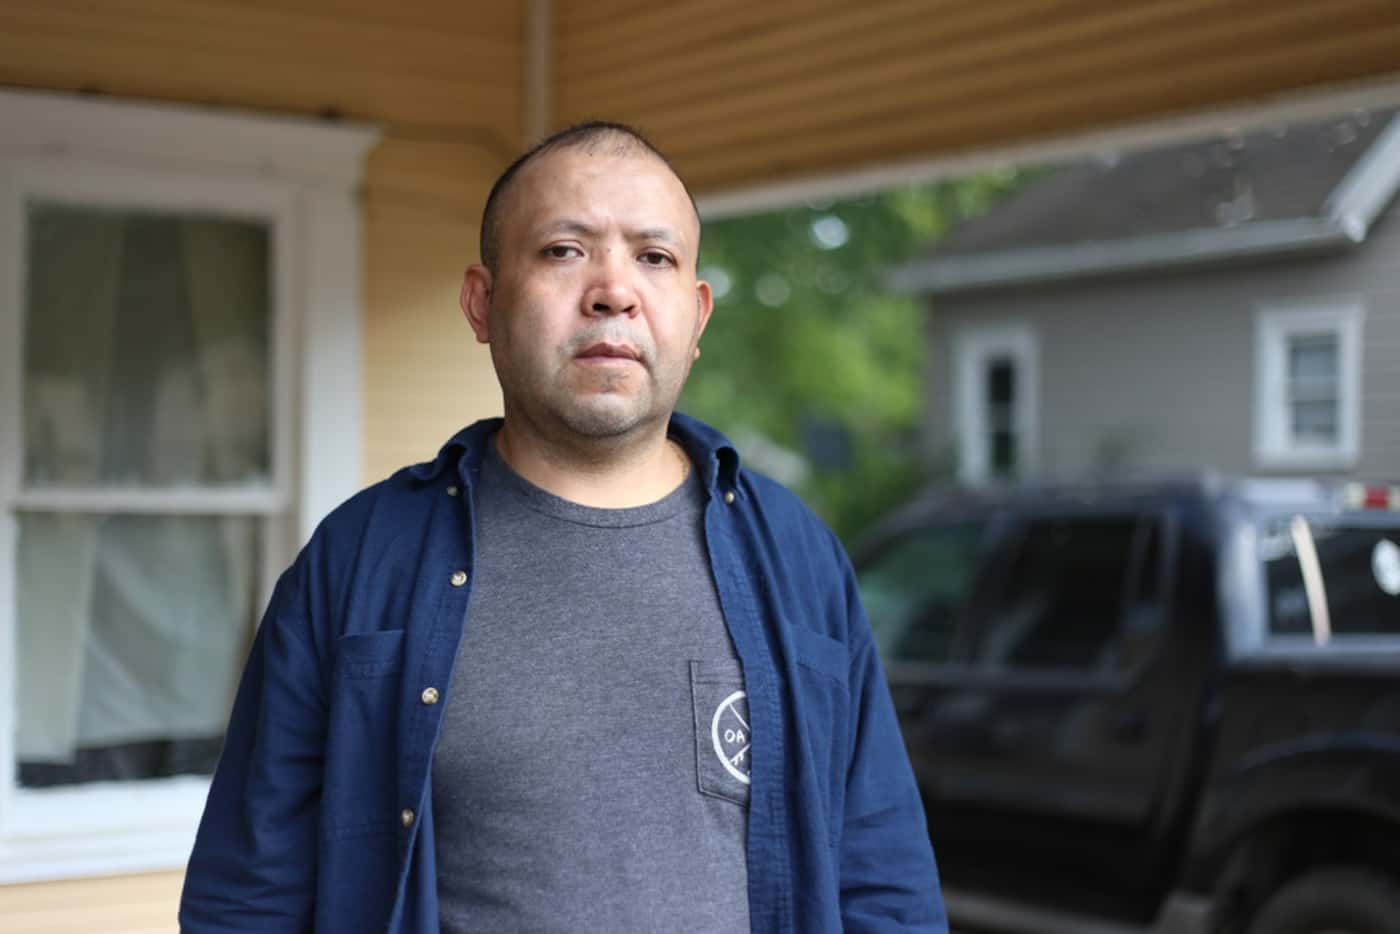 Armando Rivera stands outside his home in Commerce, TX, Oct. 7, 2018.
The Mexican immigrant...